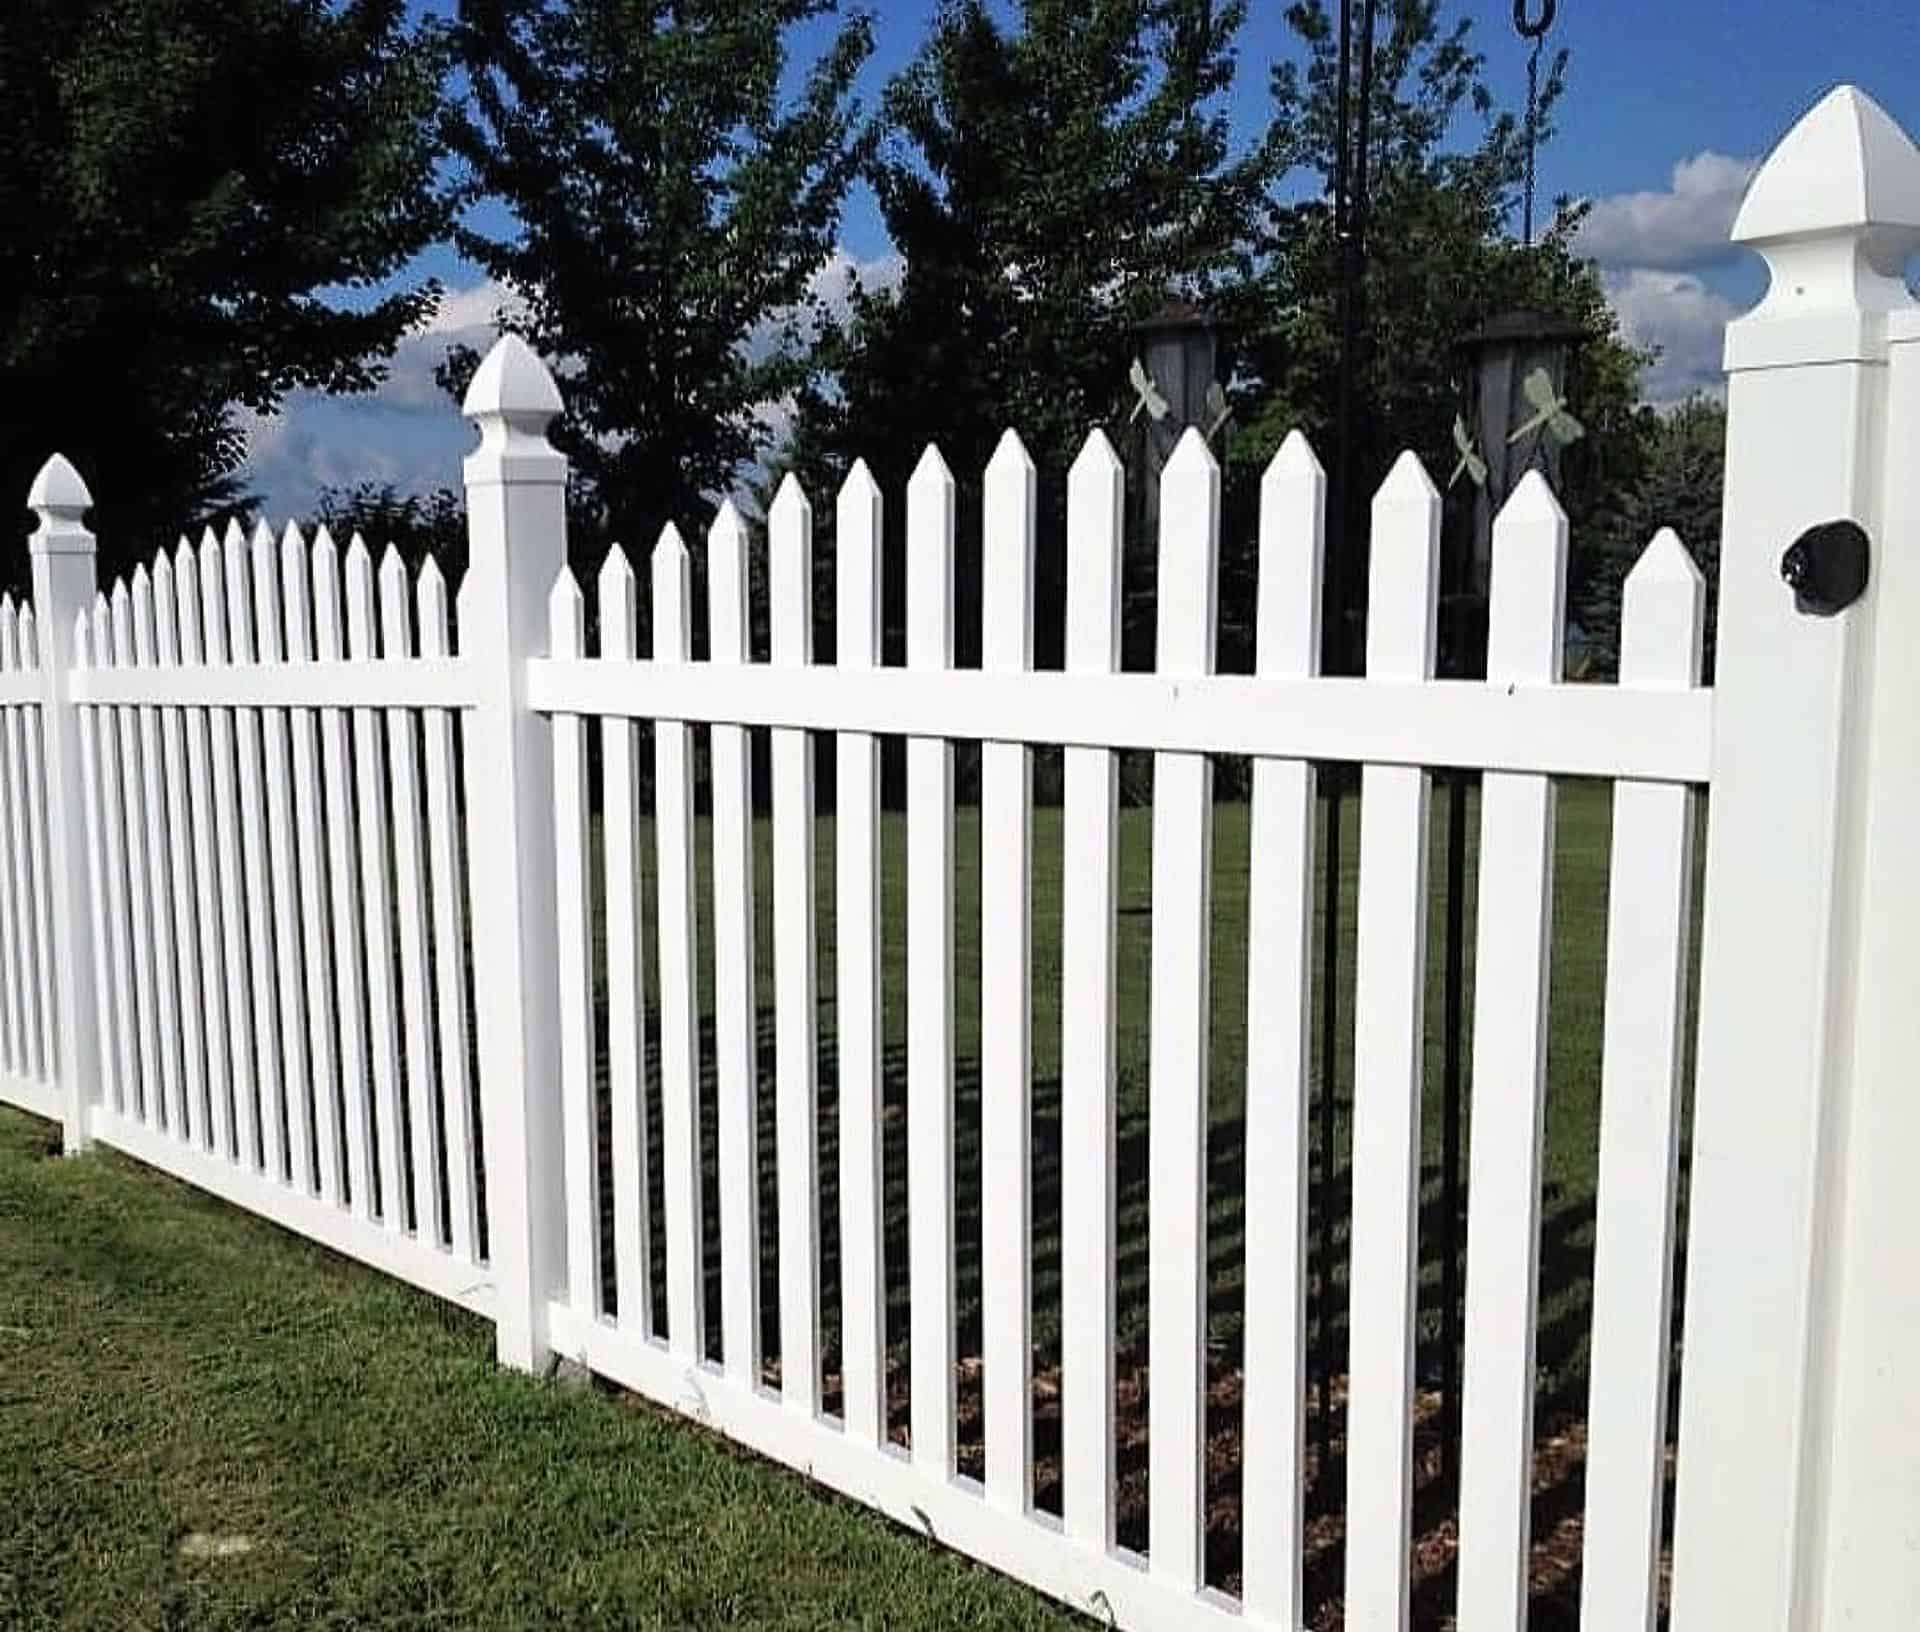 Vinyl arched picket fence with gate, on a grassy lawn with trees in the background - a charming outdoor scene